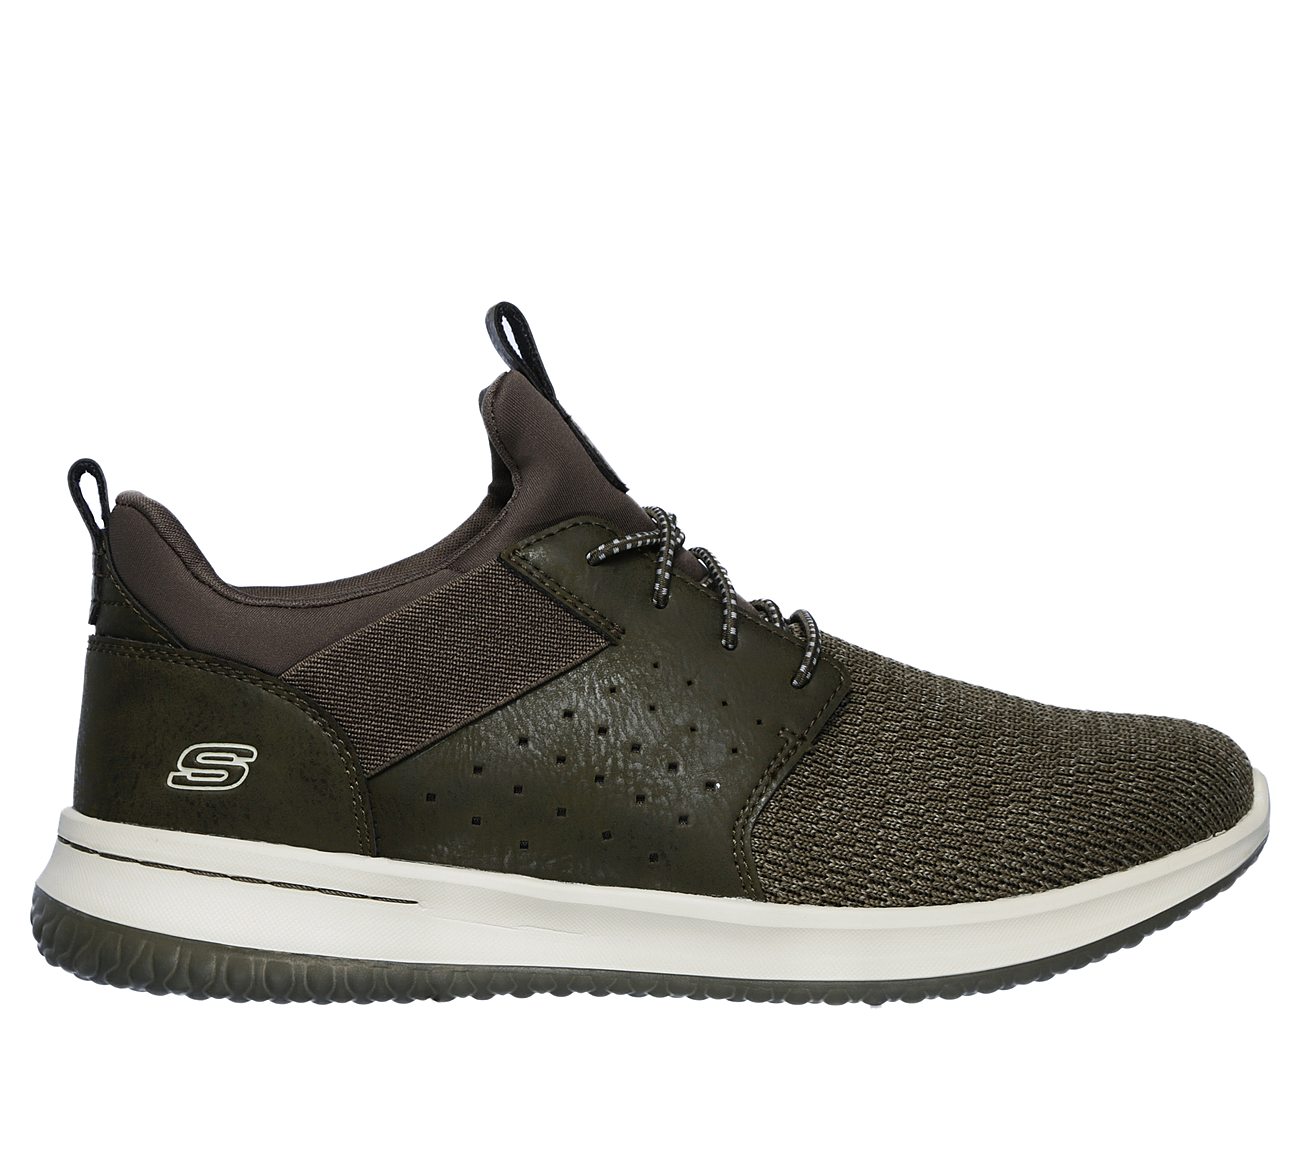 Buy SKECHERS Delson - Camben USA Casuals Shoes only $70.00